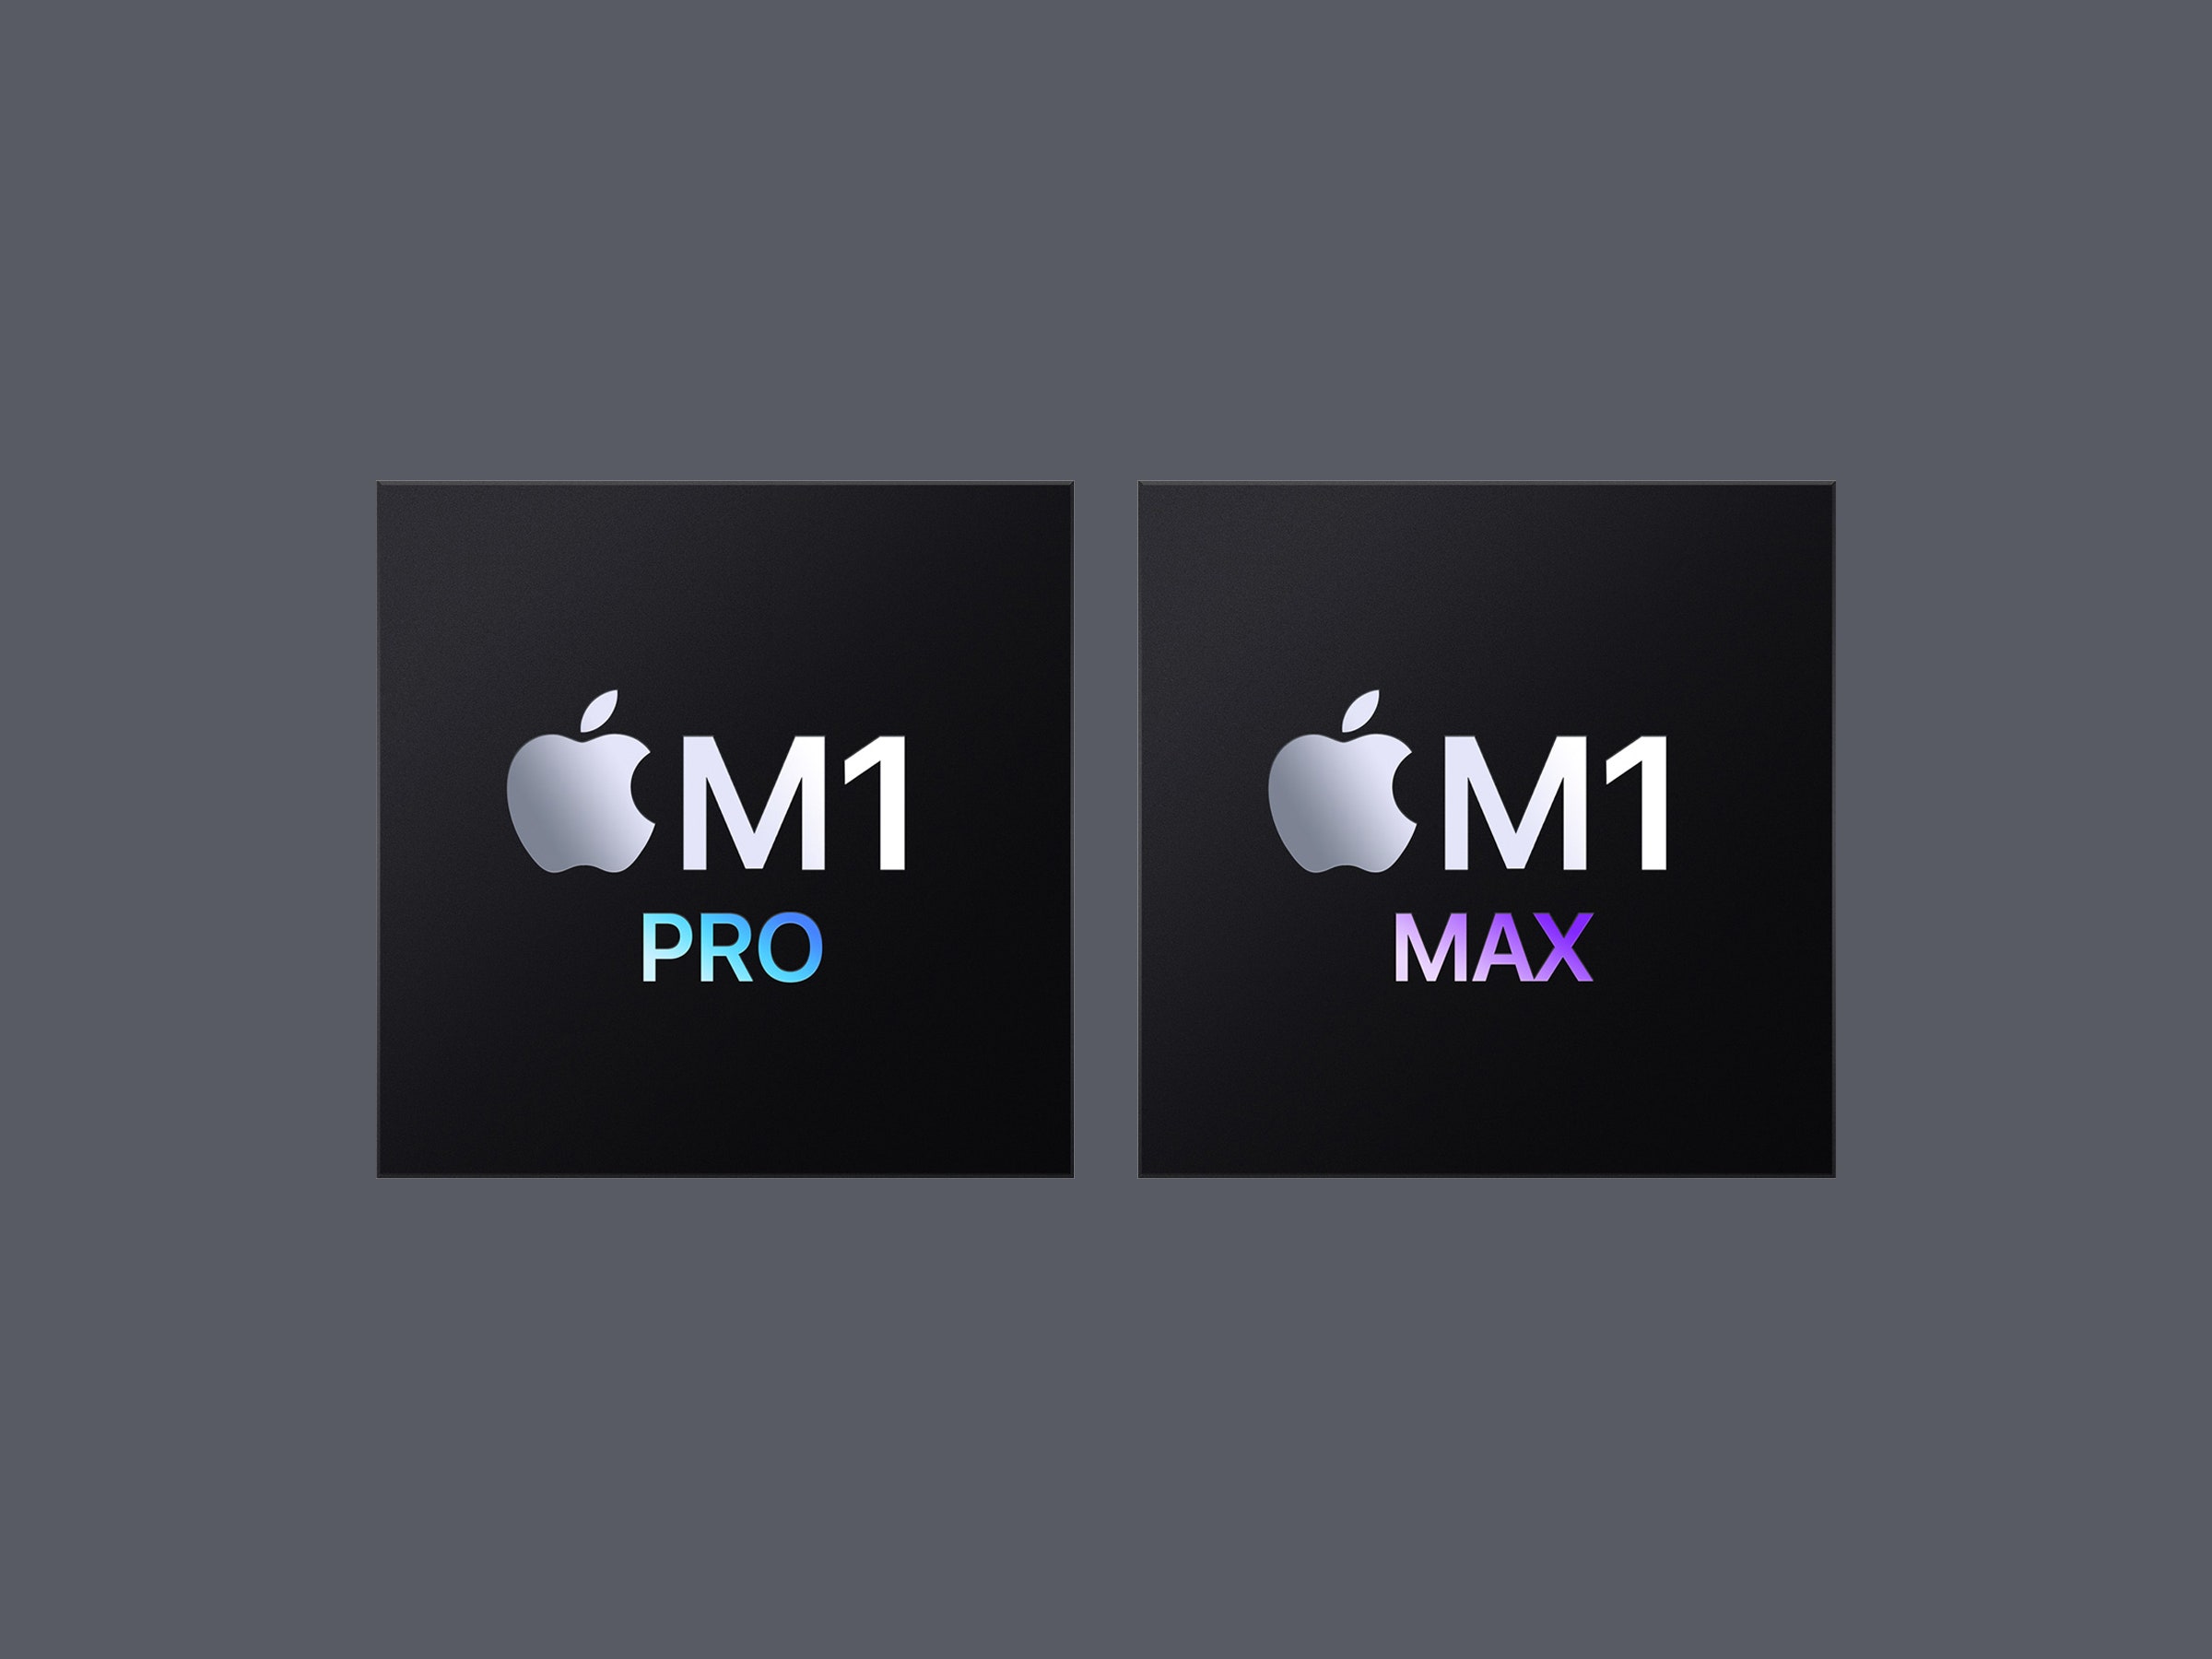 An image Apple M1 Pro and M1 Max chips.